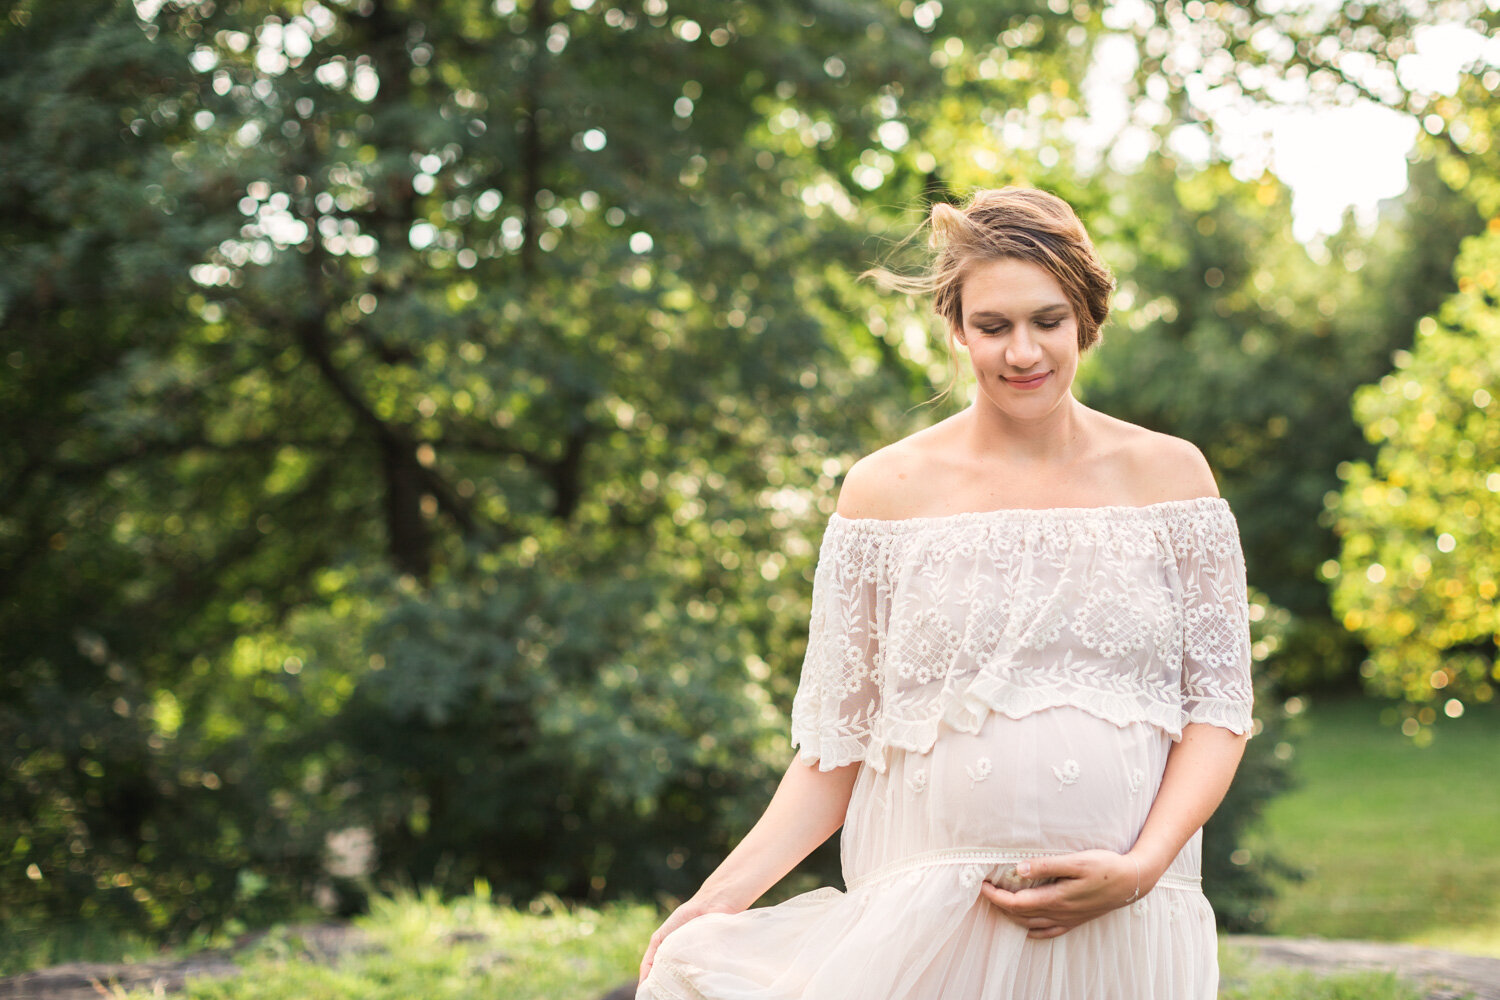 Central_Park_Maternity_Session_with_NYC_Baby_Photographer_Nicole_Hawkins_Photography_September_2019_Lara-6.jpg